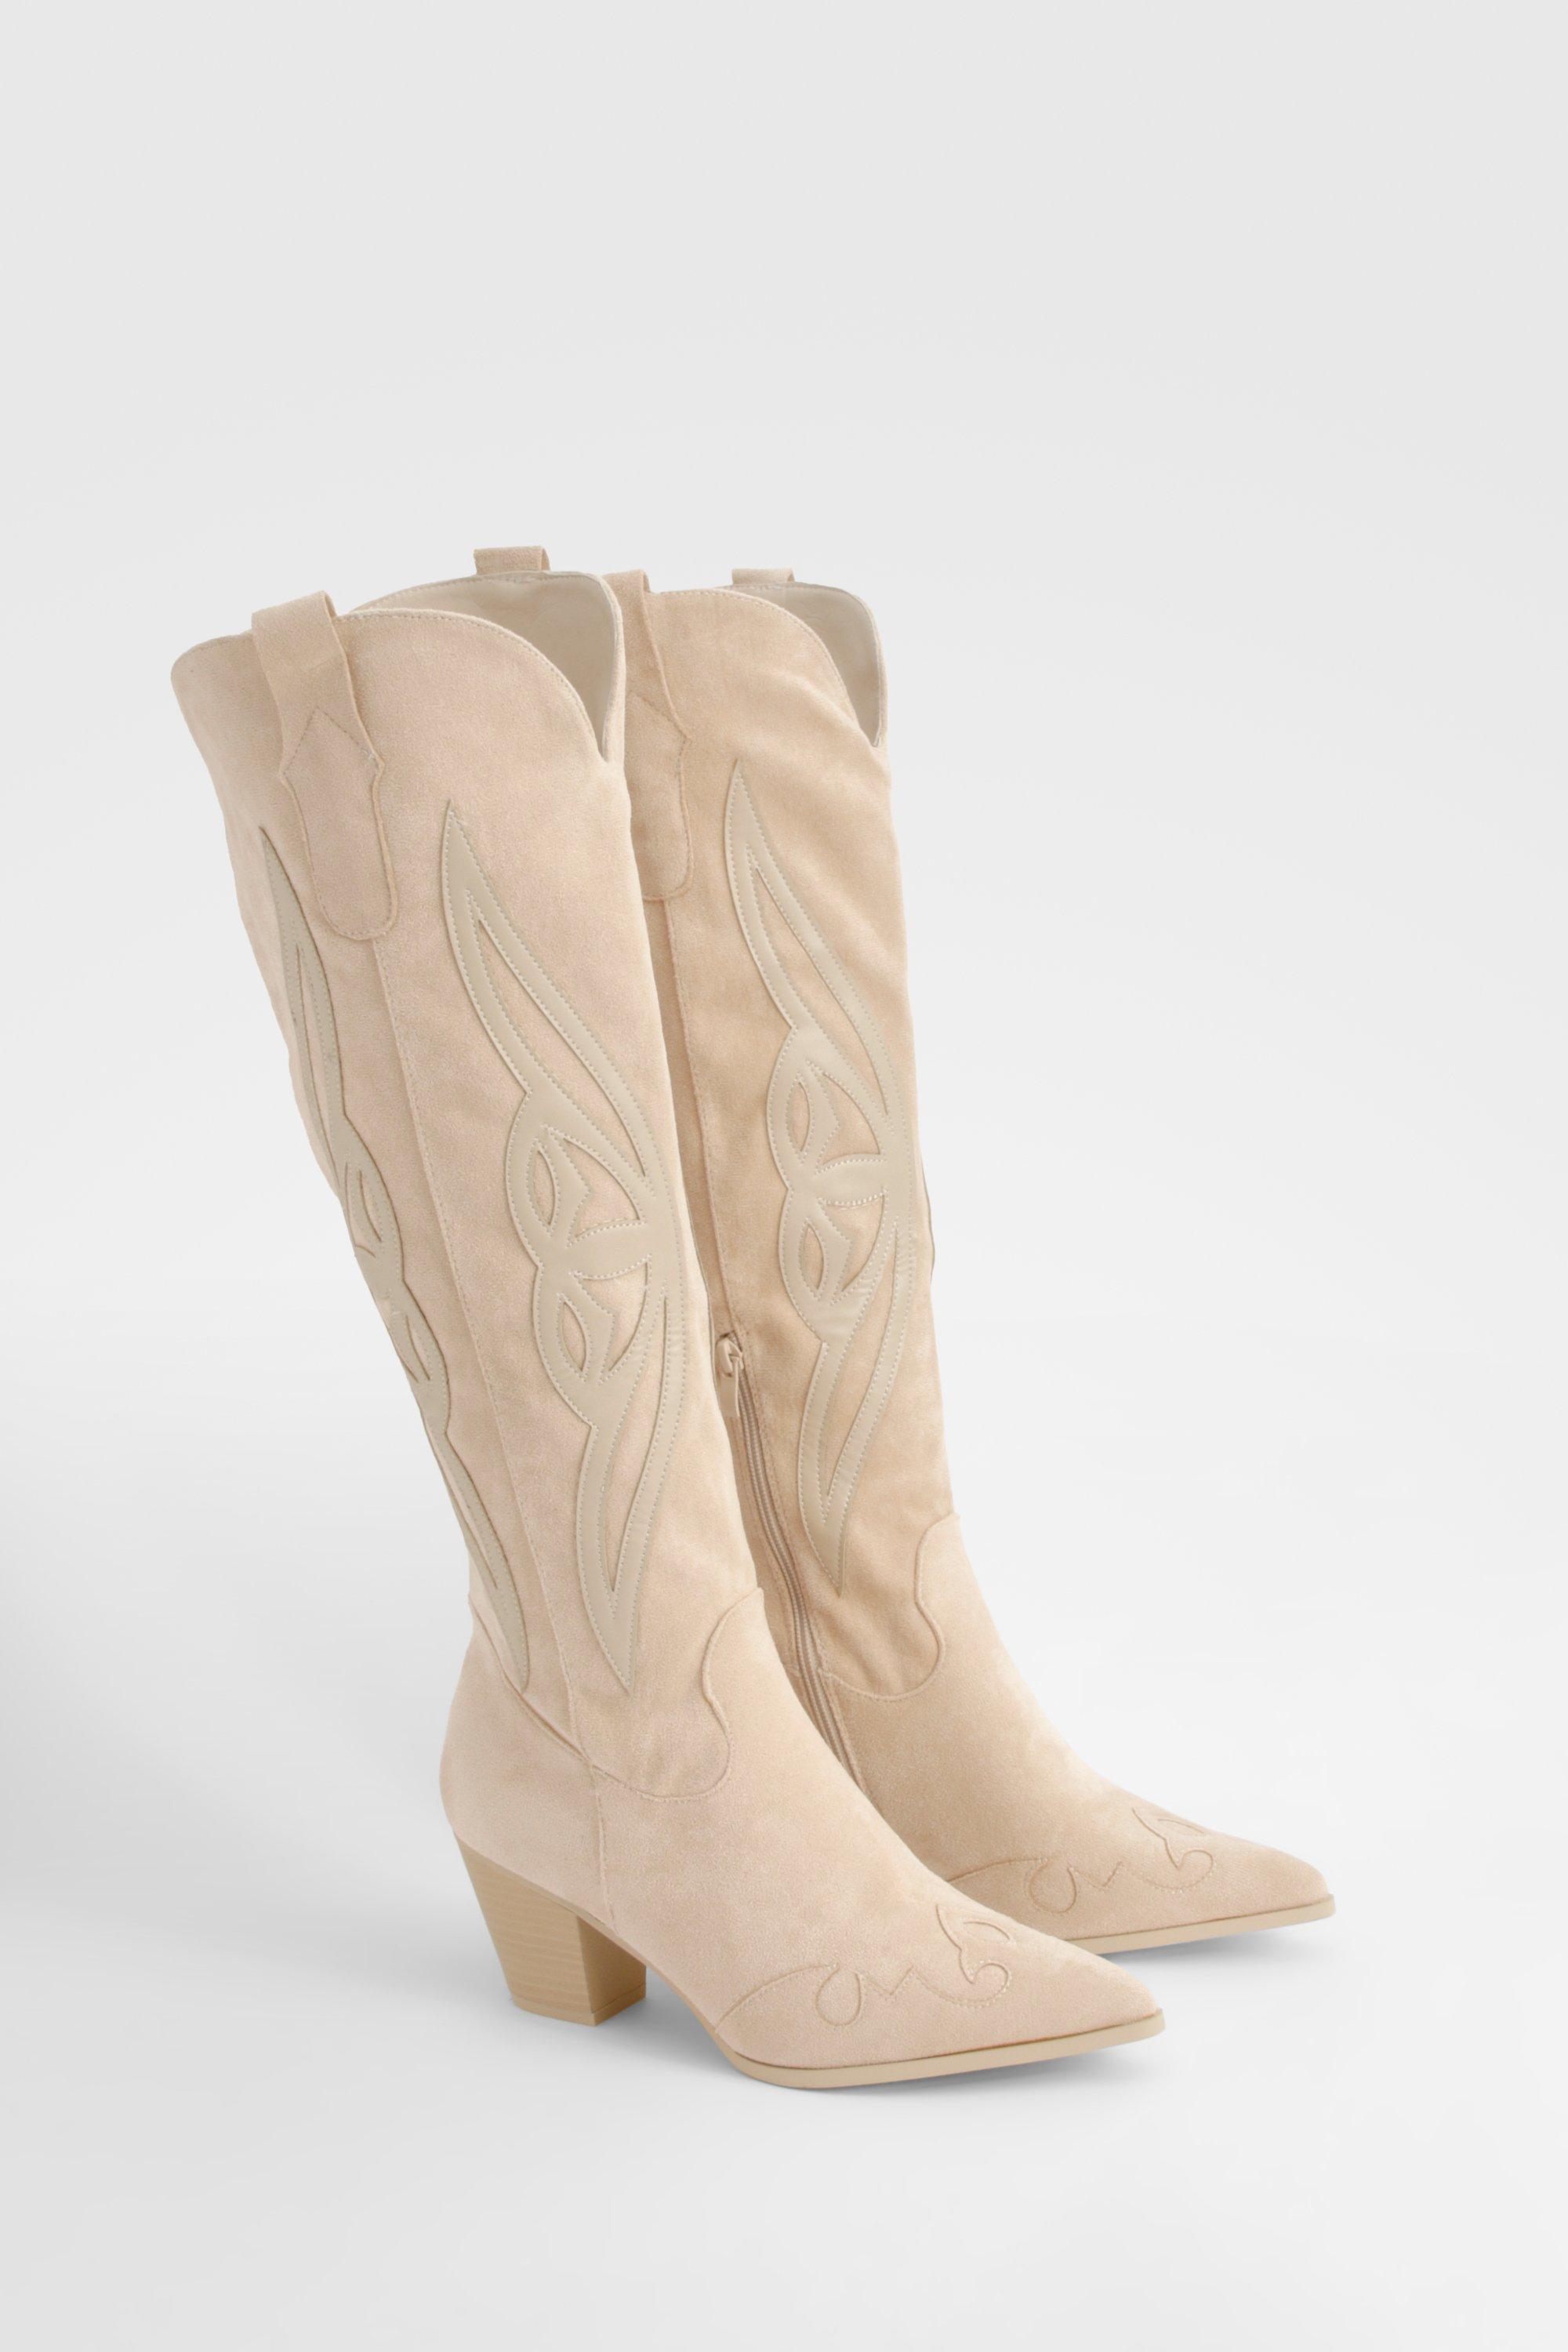 Boohoo Embroidered Panel Knee High Western Boots, Beige